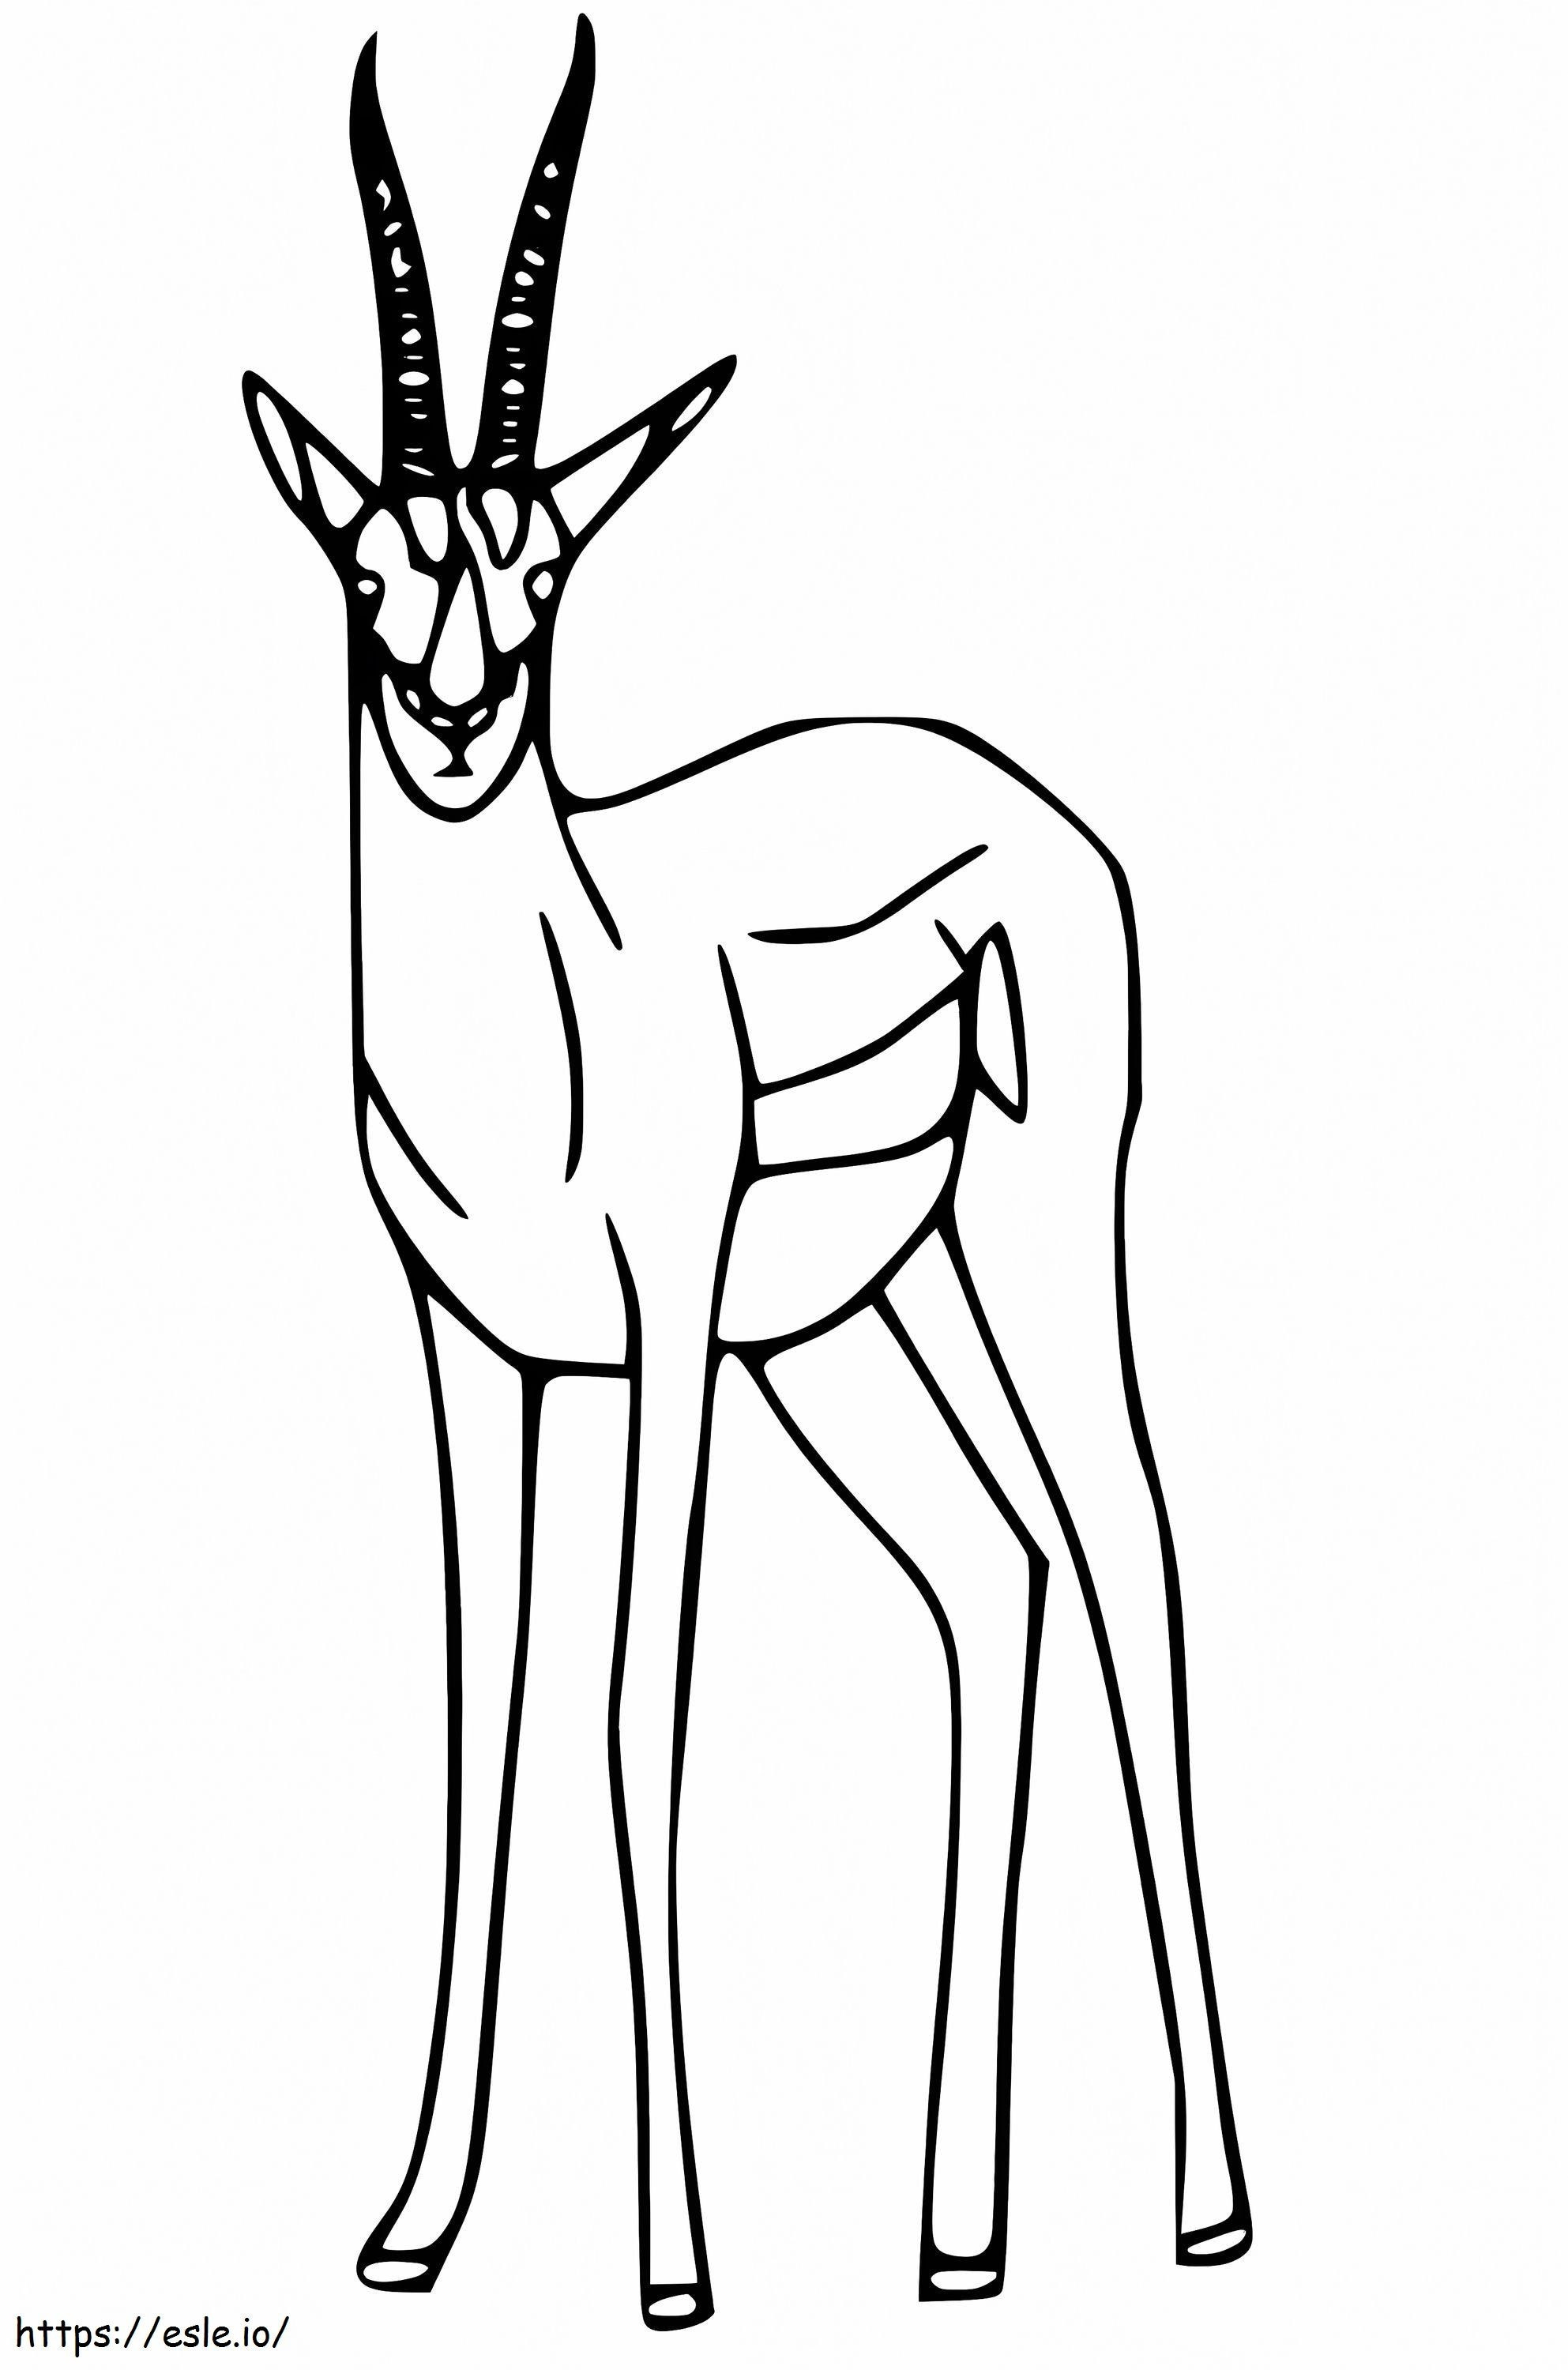 Antelope 5 coloring page